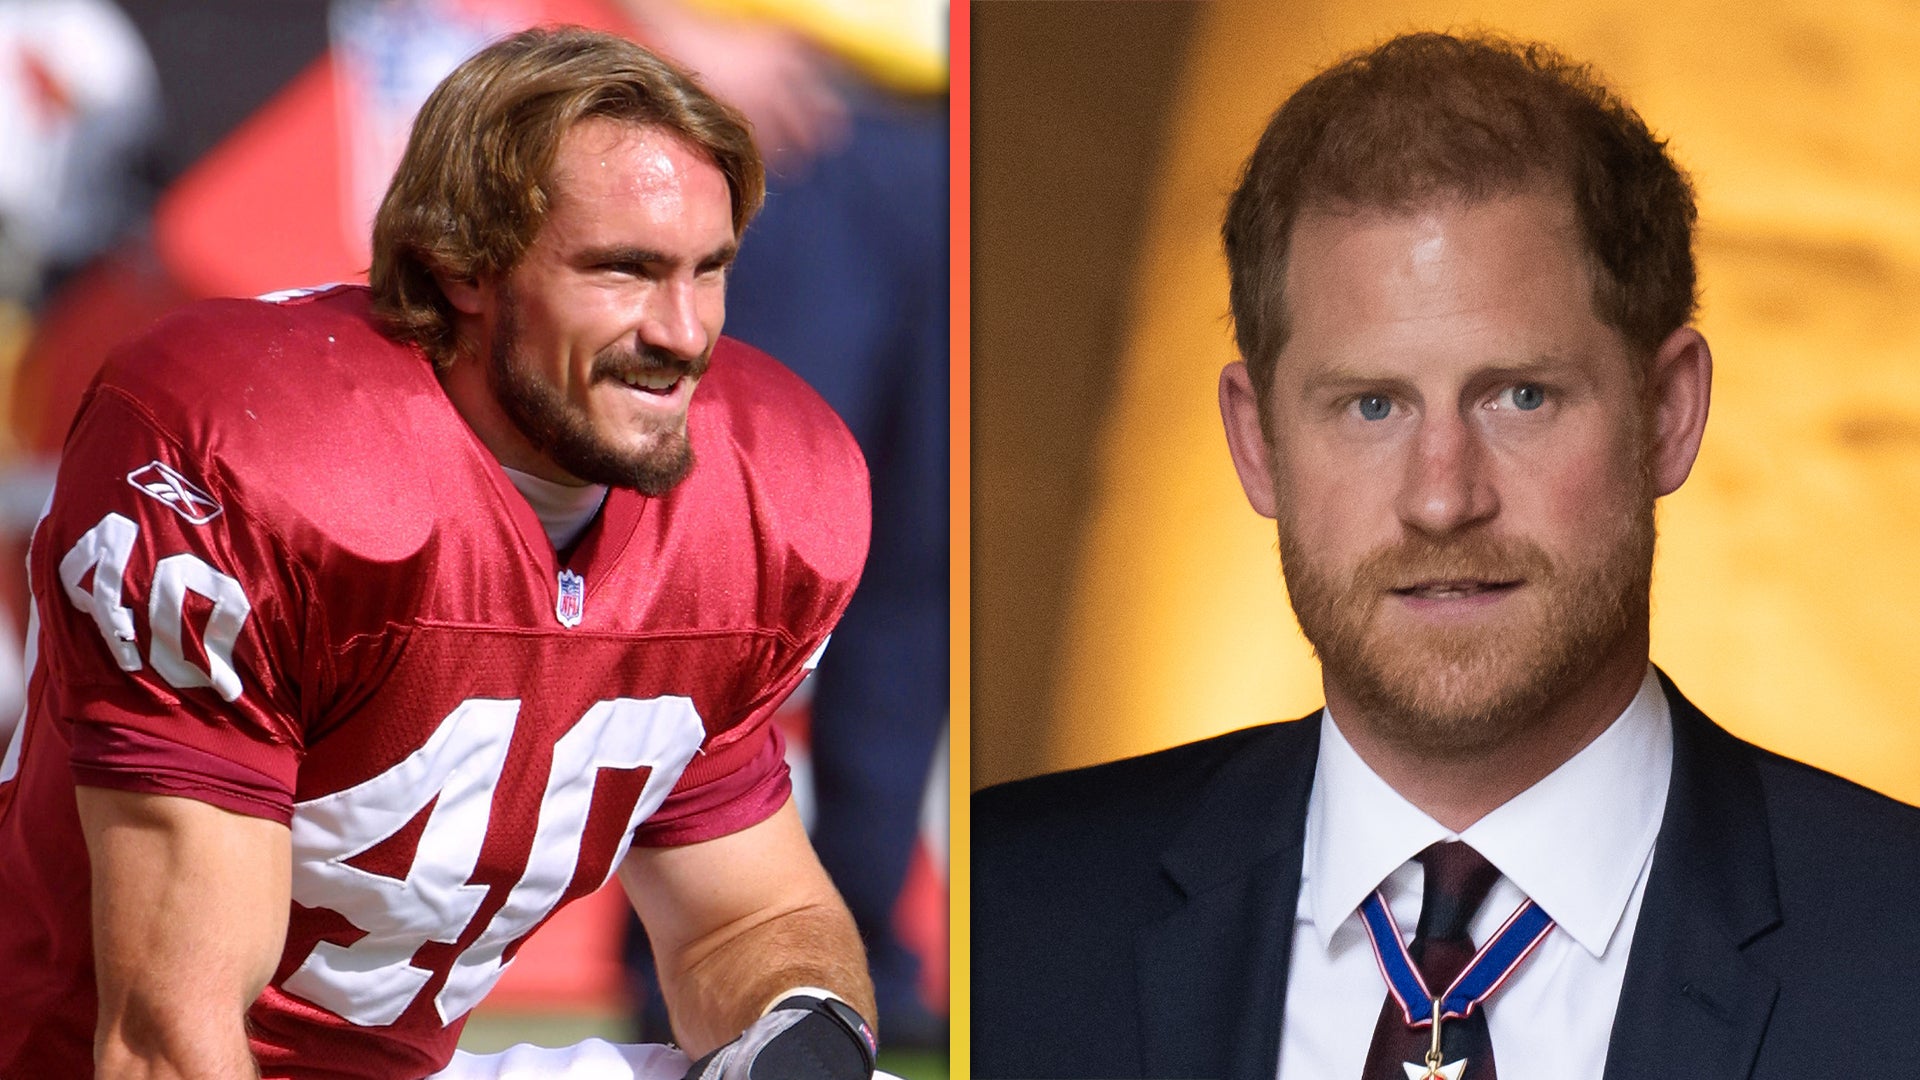 Pat Tillman's Mother Upset and 'Shocked' Over Prince Harry's ESPYs Award